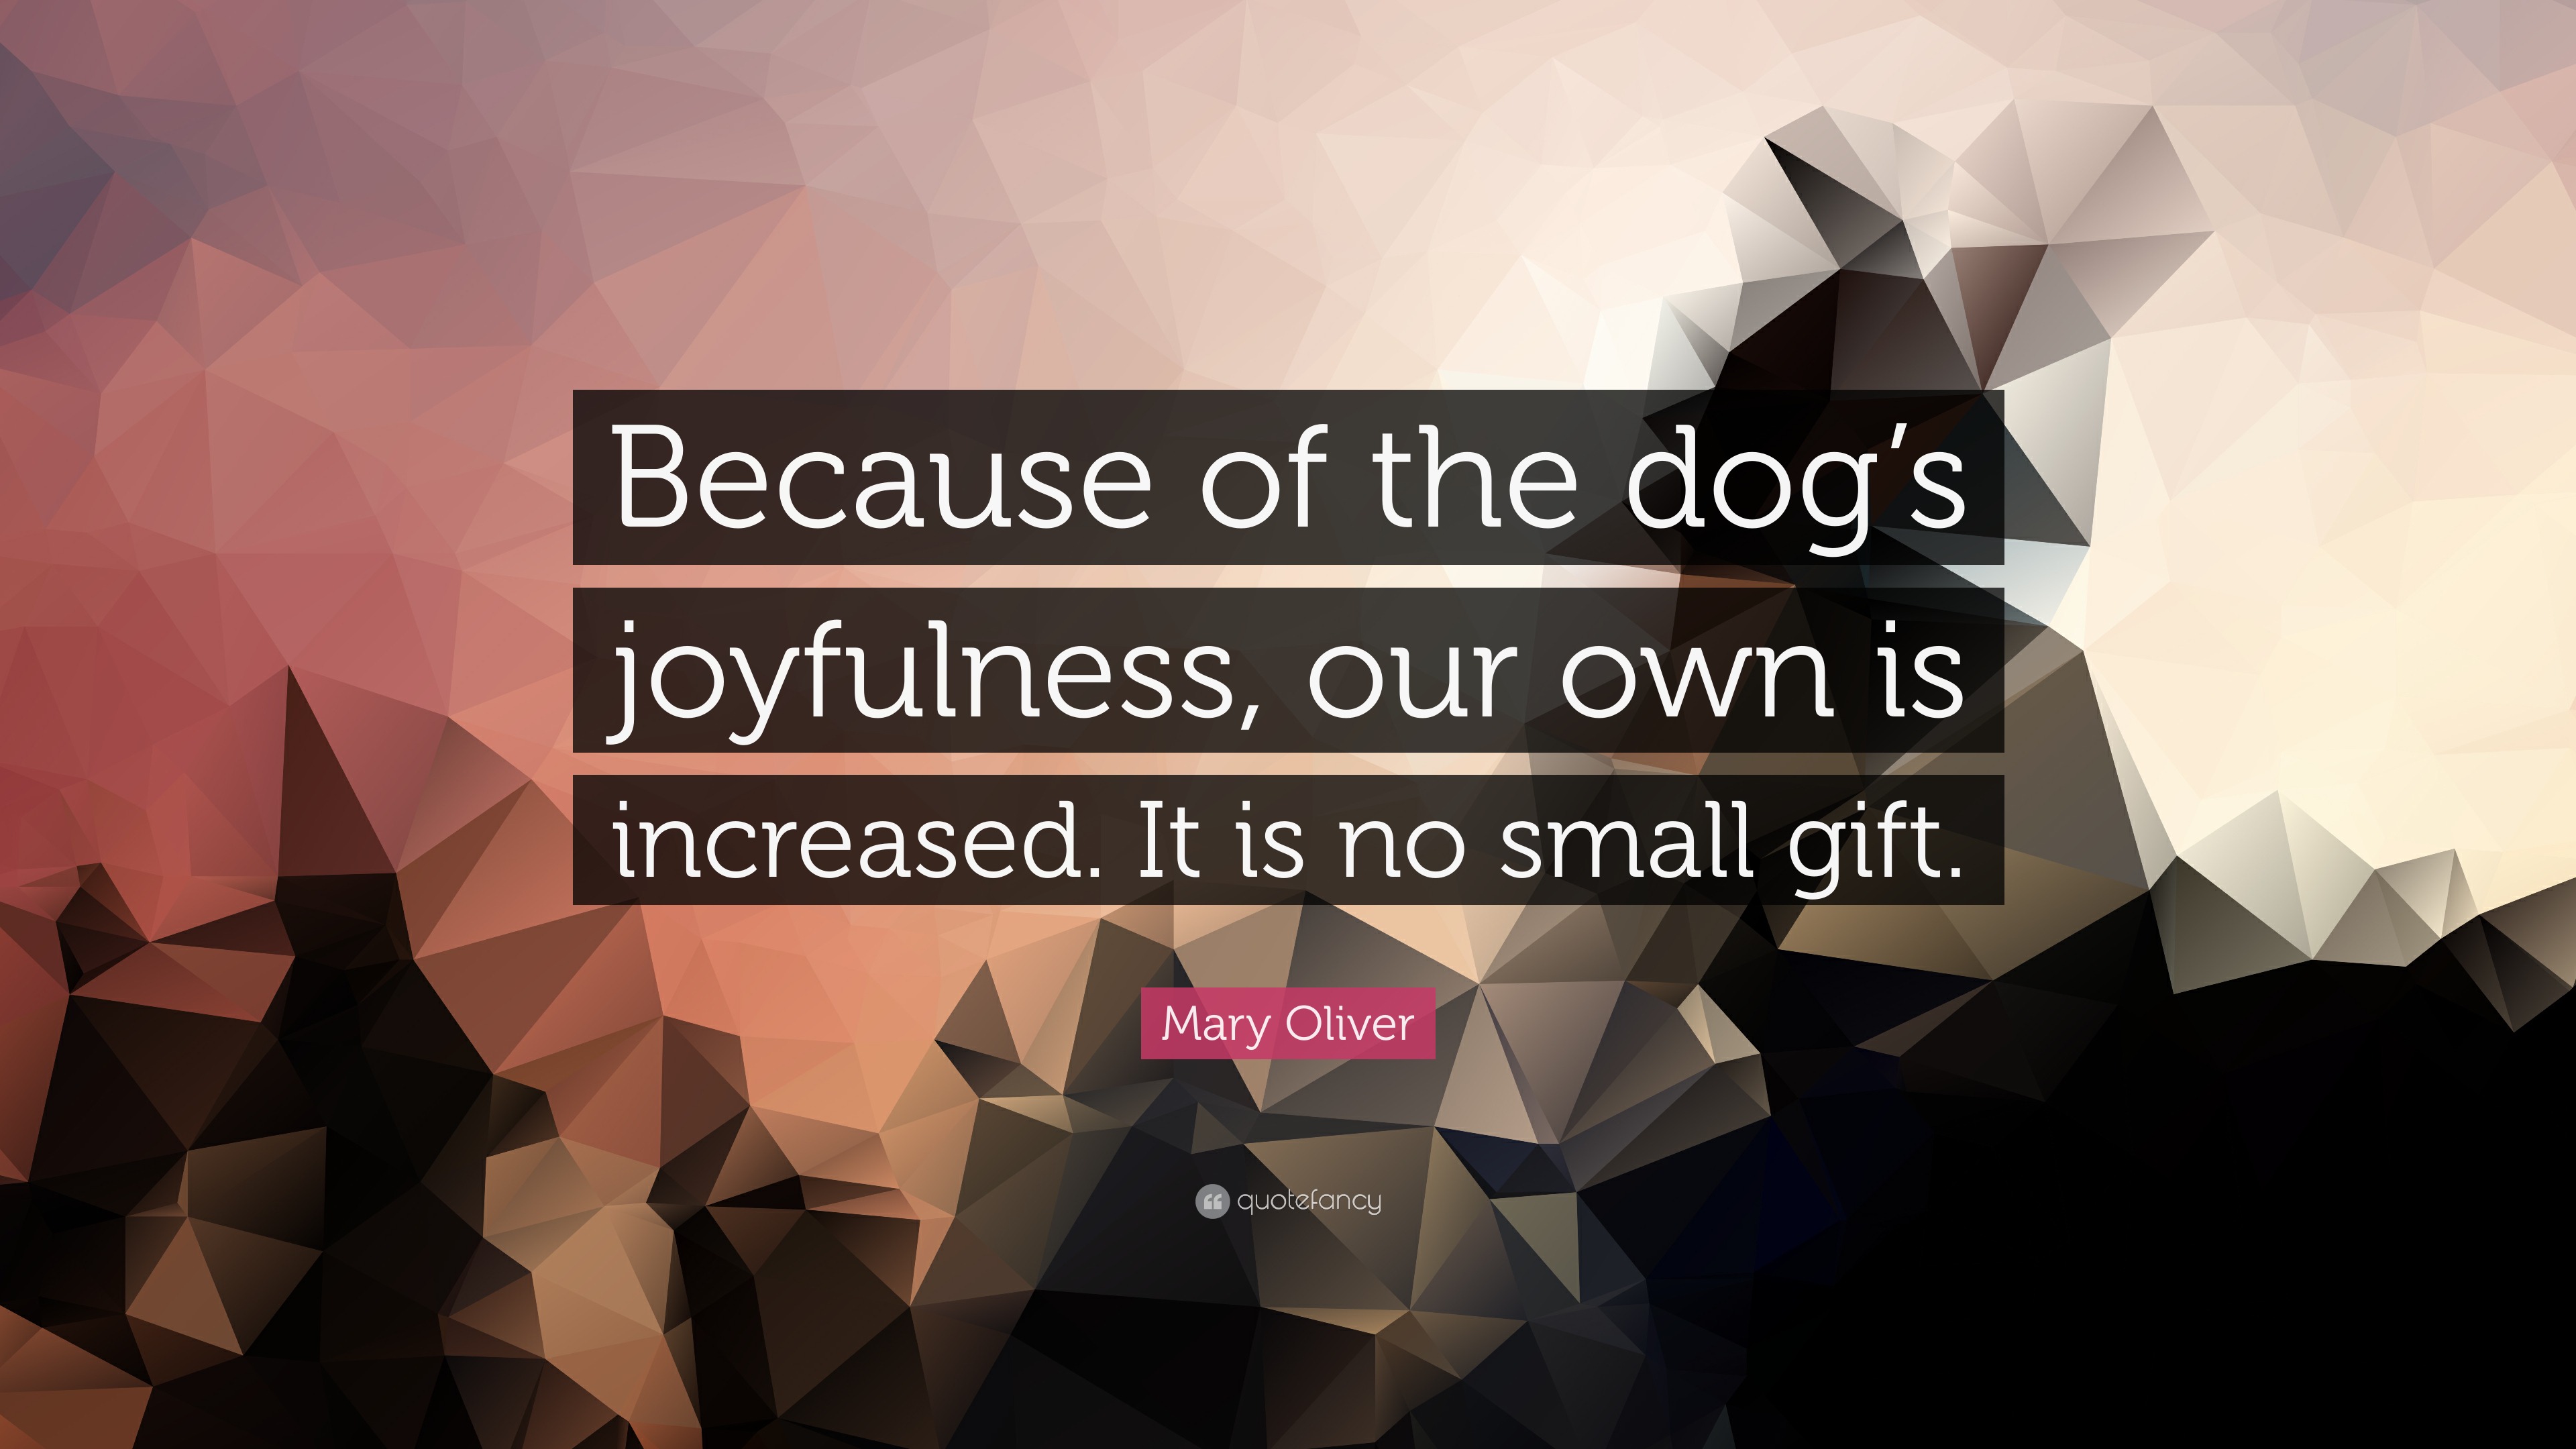 "because of the dog"s joyfulness, our own is increased.